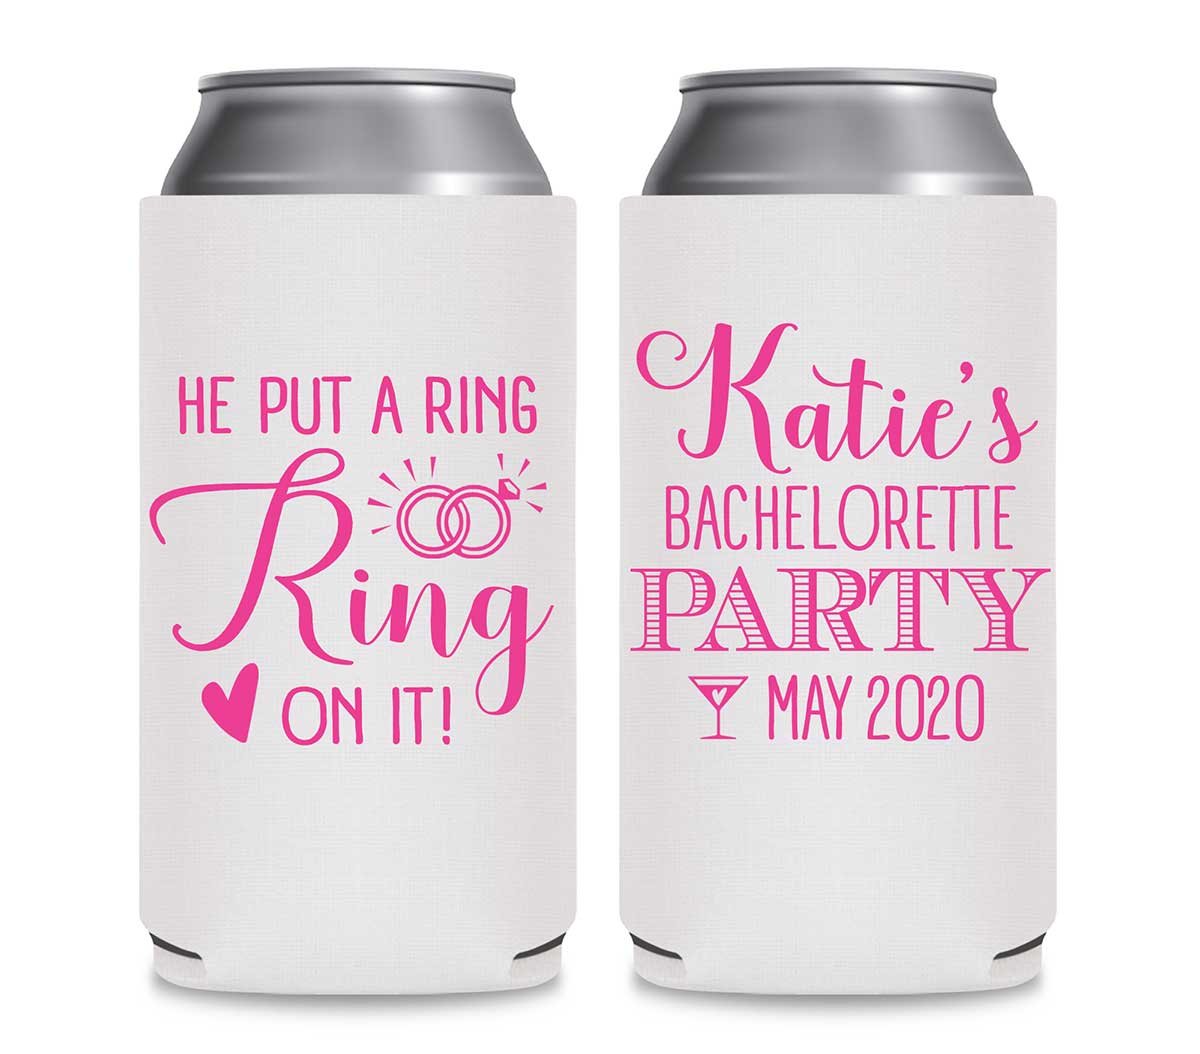 https://www.thatweddingshop.com/wp-content/uploads/2019/12/He-Put-A-Ring-On-It-1A-Collapsible-Foam-12oz-Slim-Can-Koozies-Cute-Bachelorette-Party-Favors.jpg